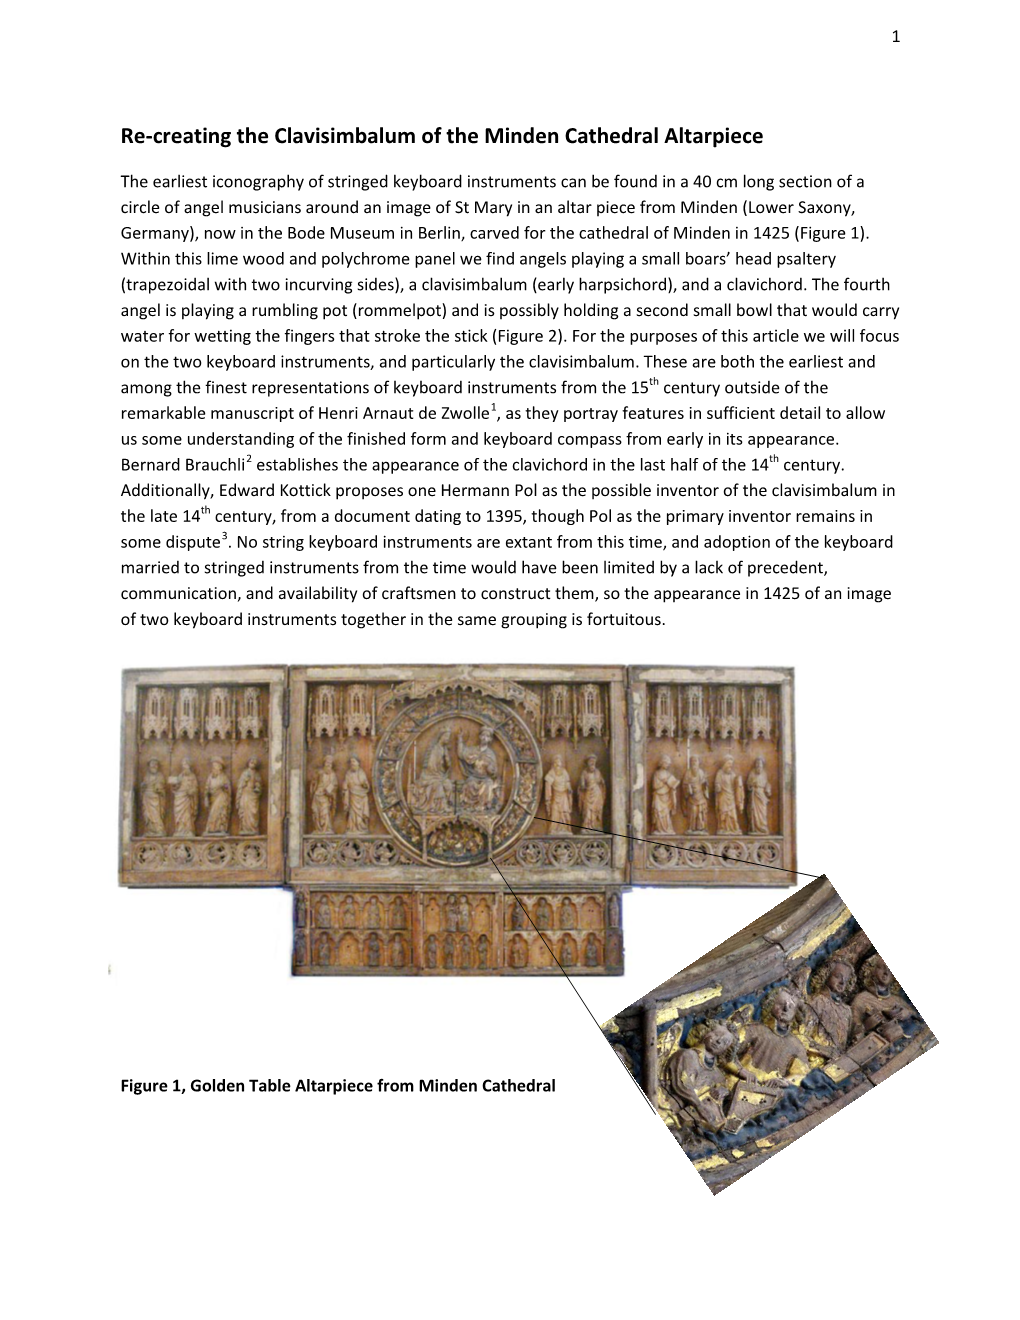 Re-Creating the Clavisimbalum of the Minden Cathedral Altarpiece